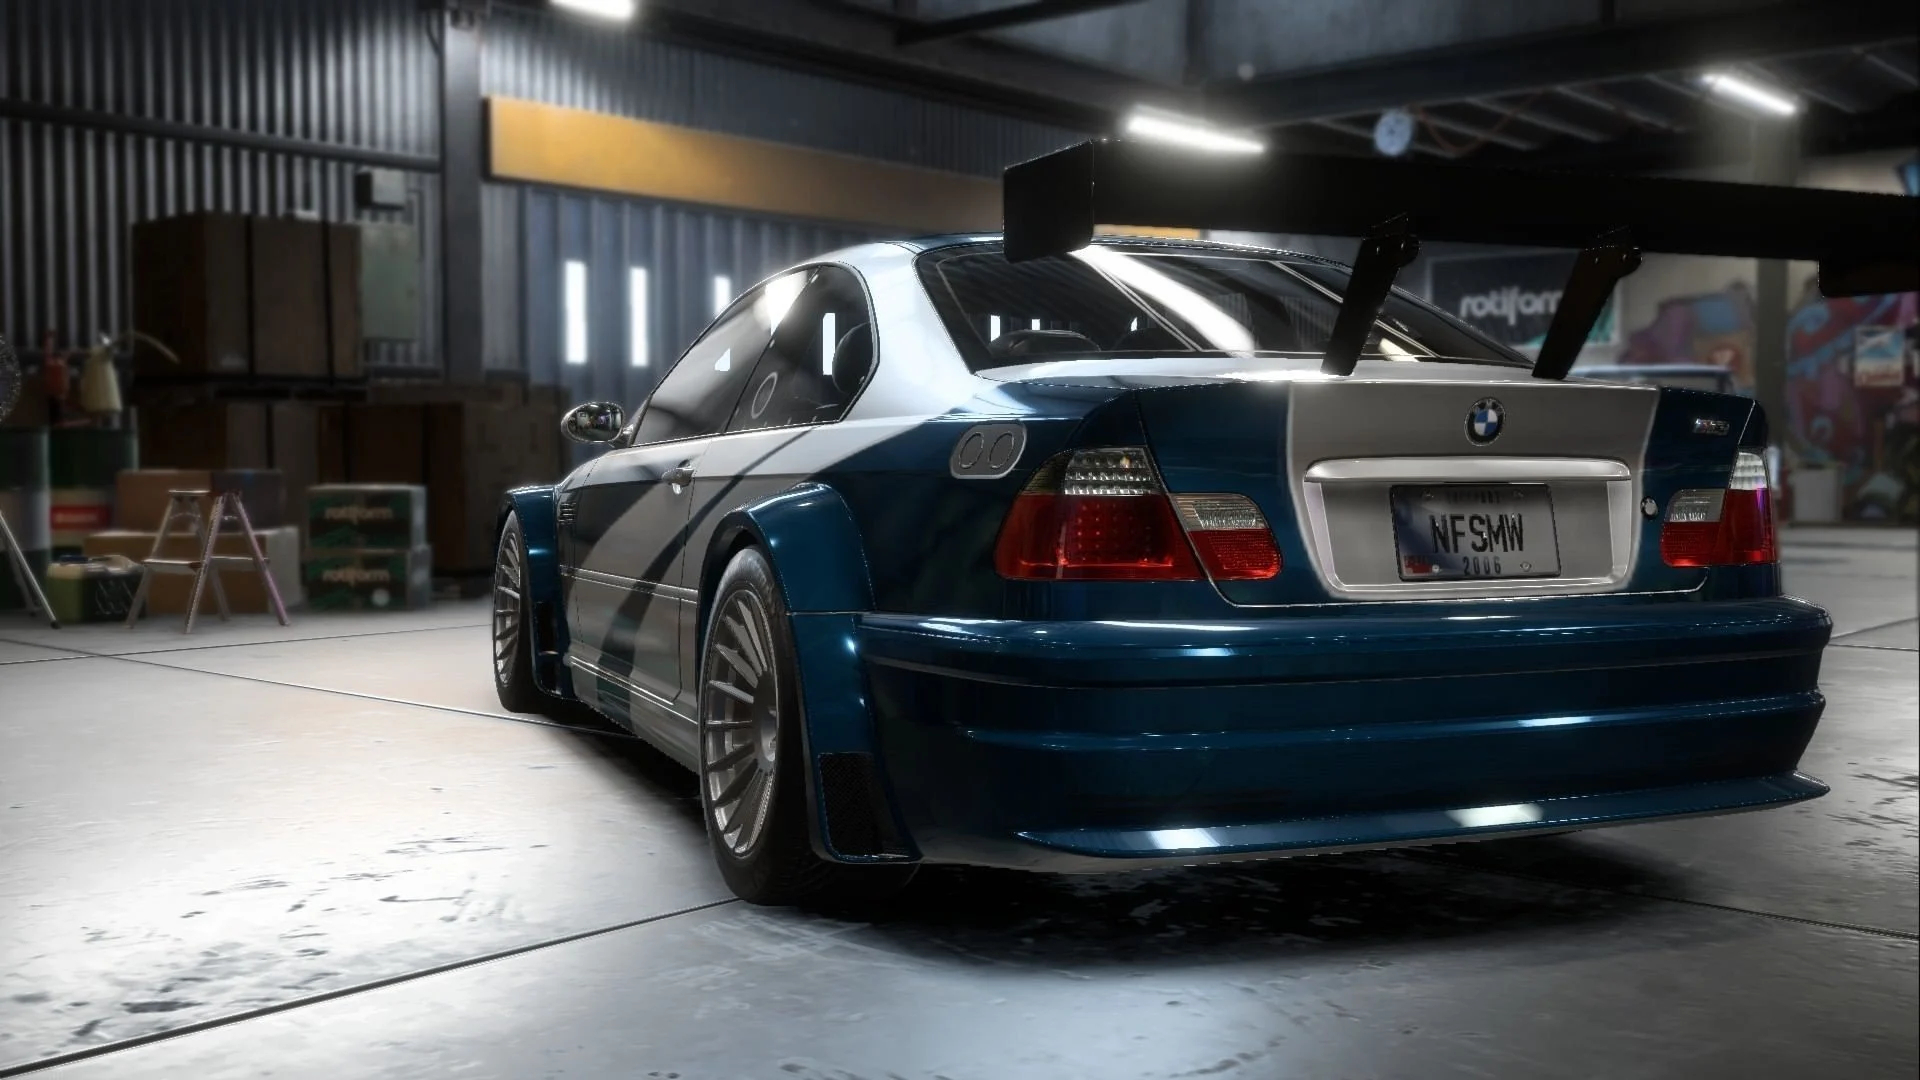 1920x1080 Need for Speed: Most Wanted Wallpapers Top Free Need for Speed: Most Wanted Backgrounds